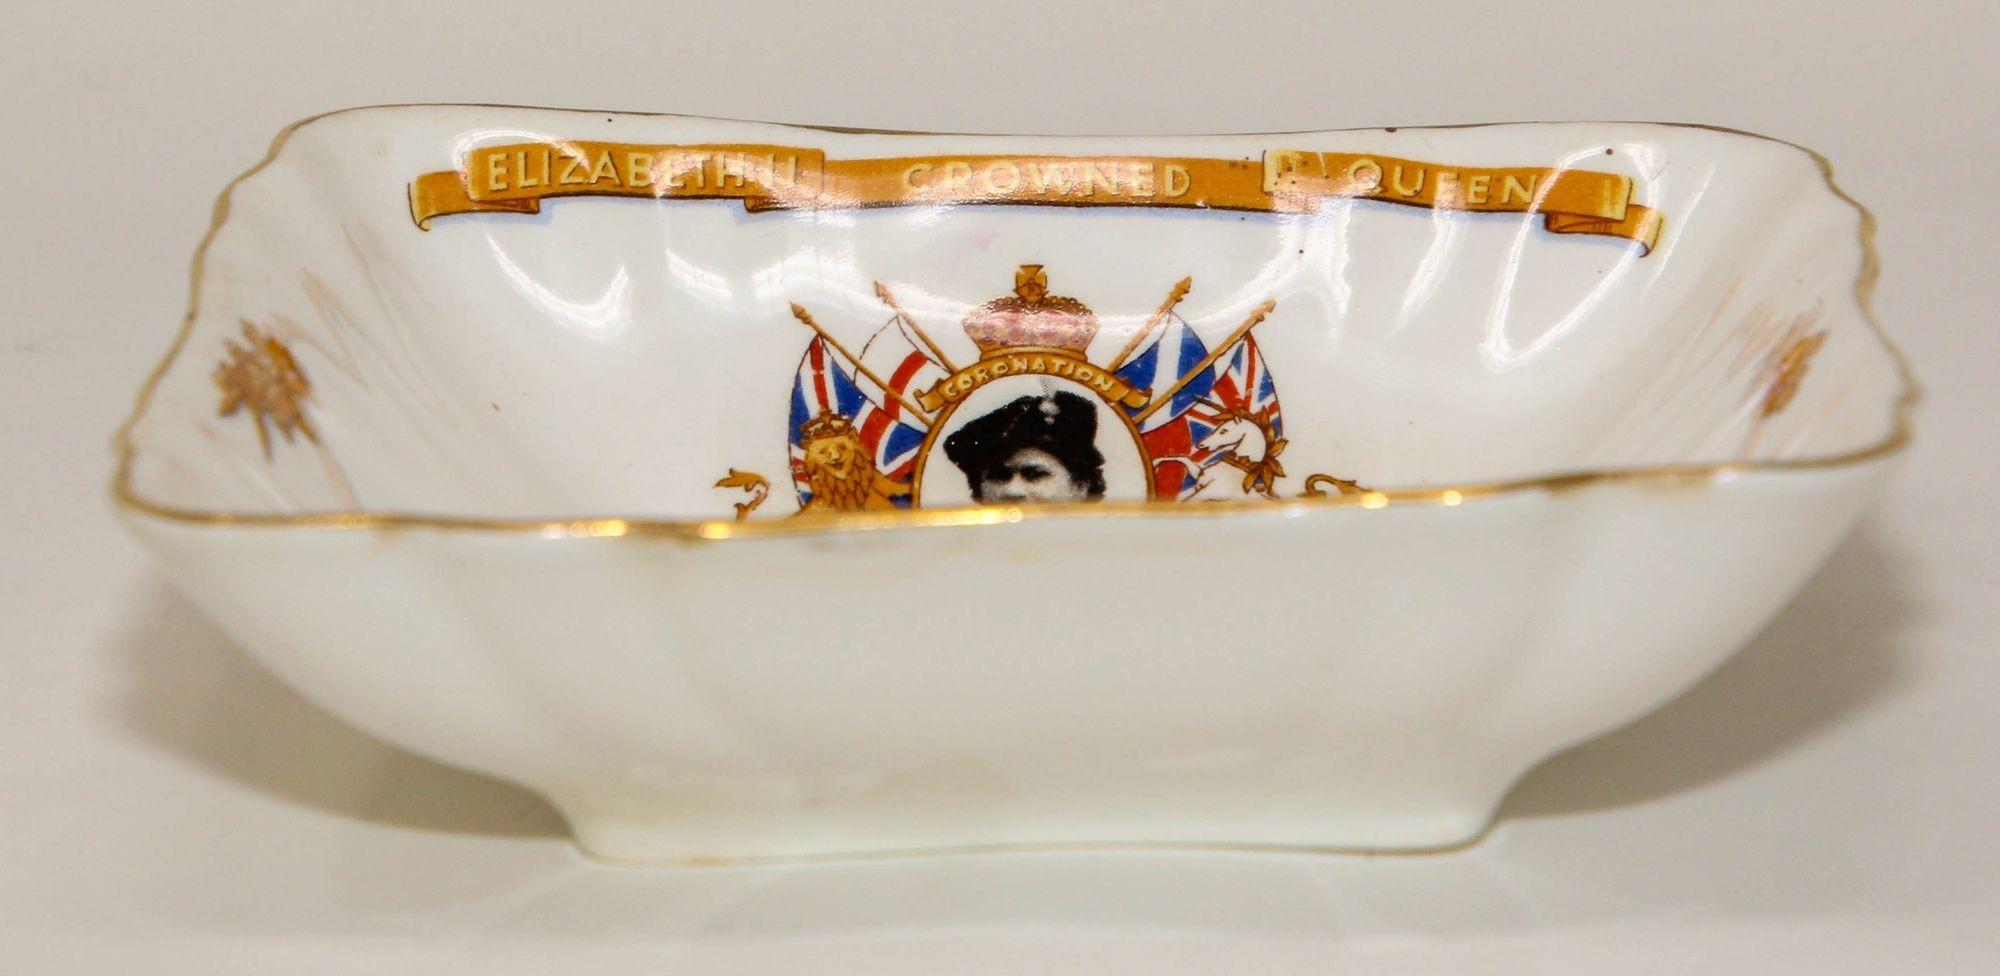 HM Queen Elizabeth II Coronation Bowl England 1953
Mid-century (1953) Radfords Bone China Commemorative bowl celebrating the Coronation of Queen Elizabeth II on June 2nd, 1953. Central sepia image of Queen Elizabeth II surrounded by various colored